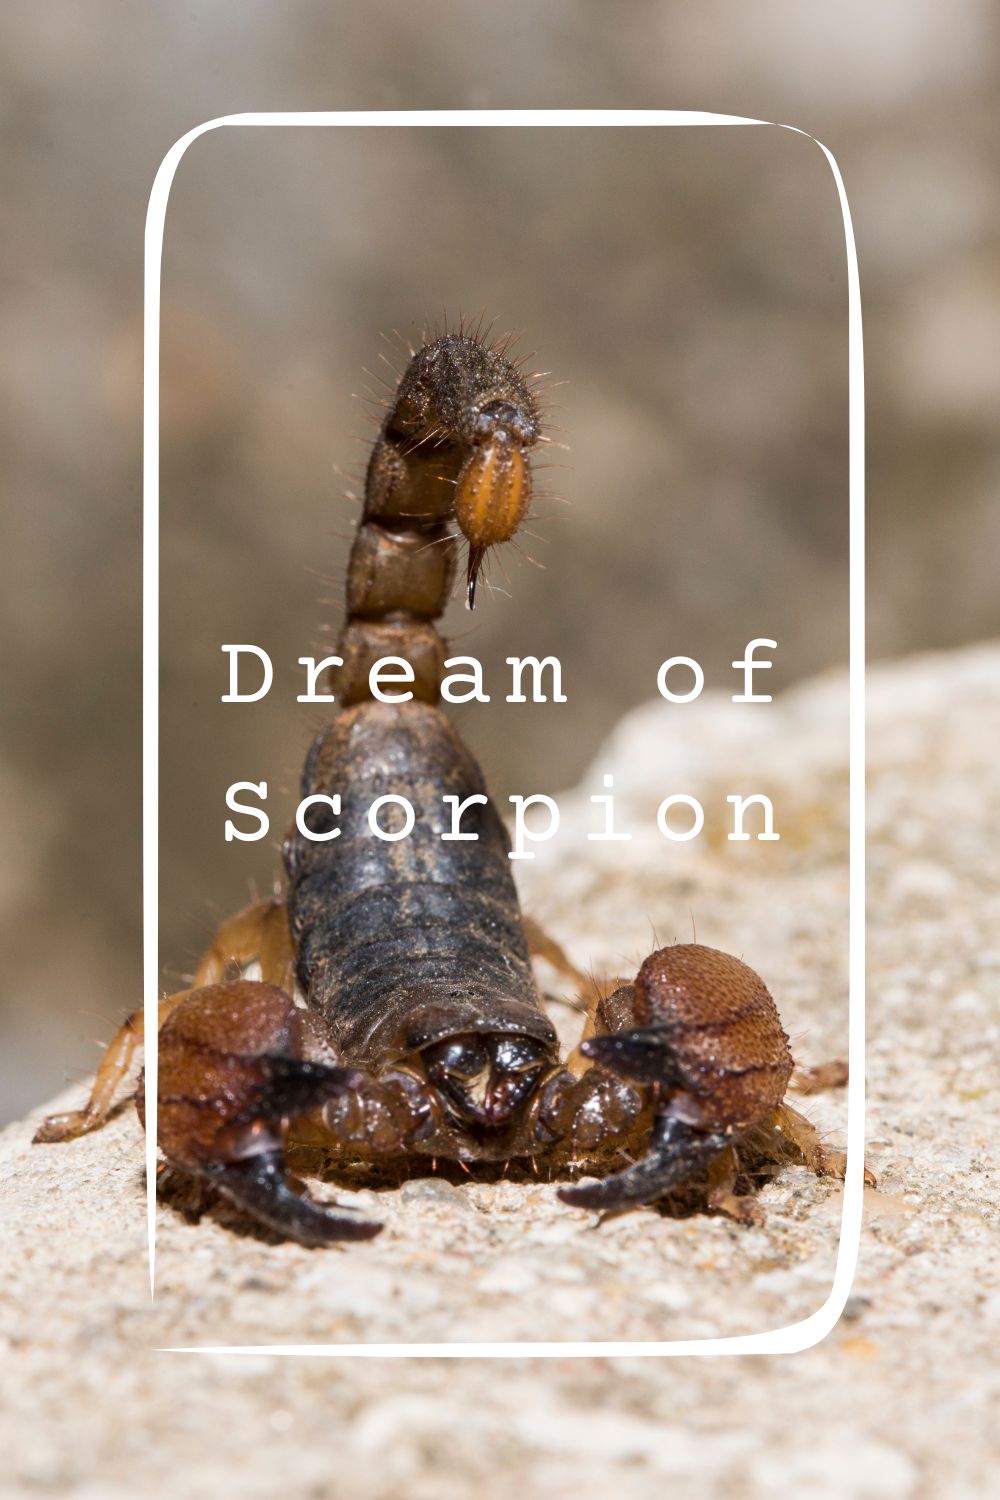 12 Dream of Scorpion Meanings1